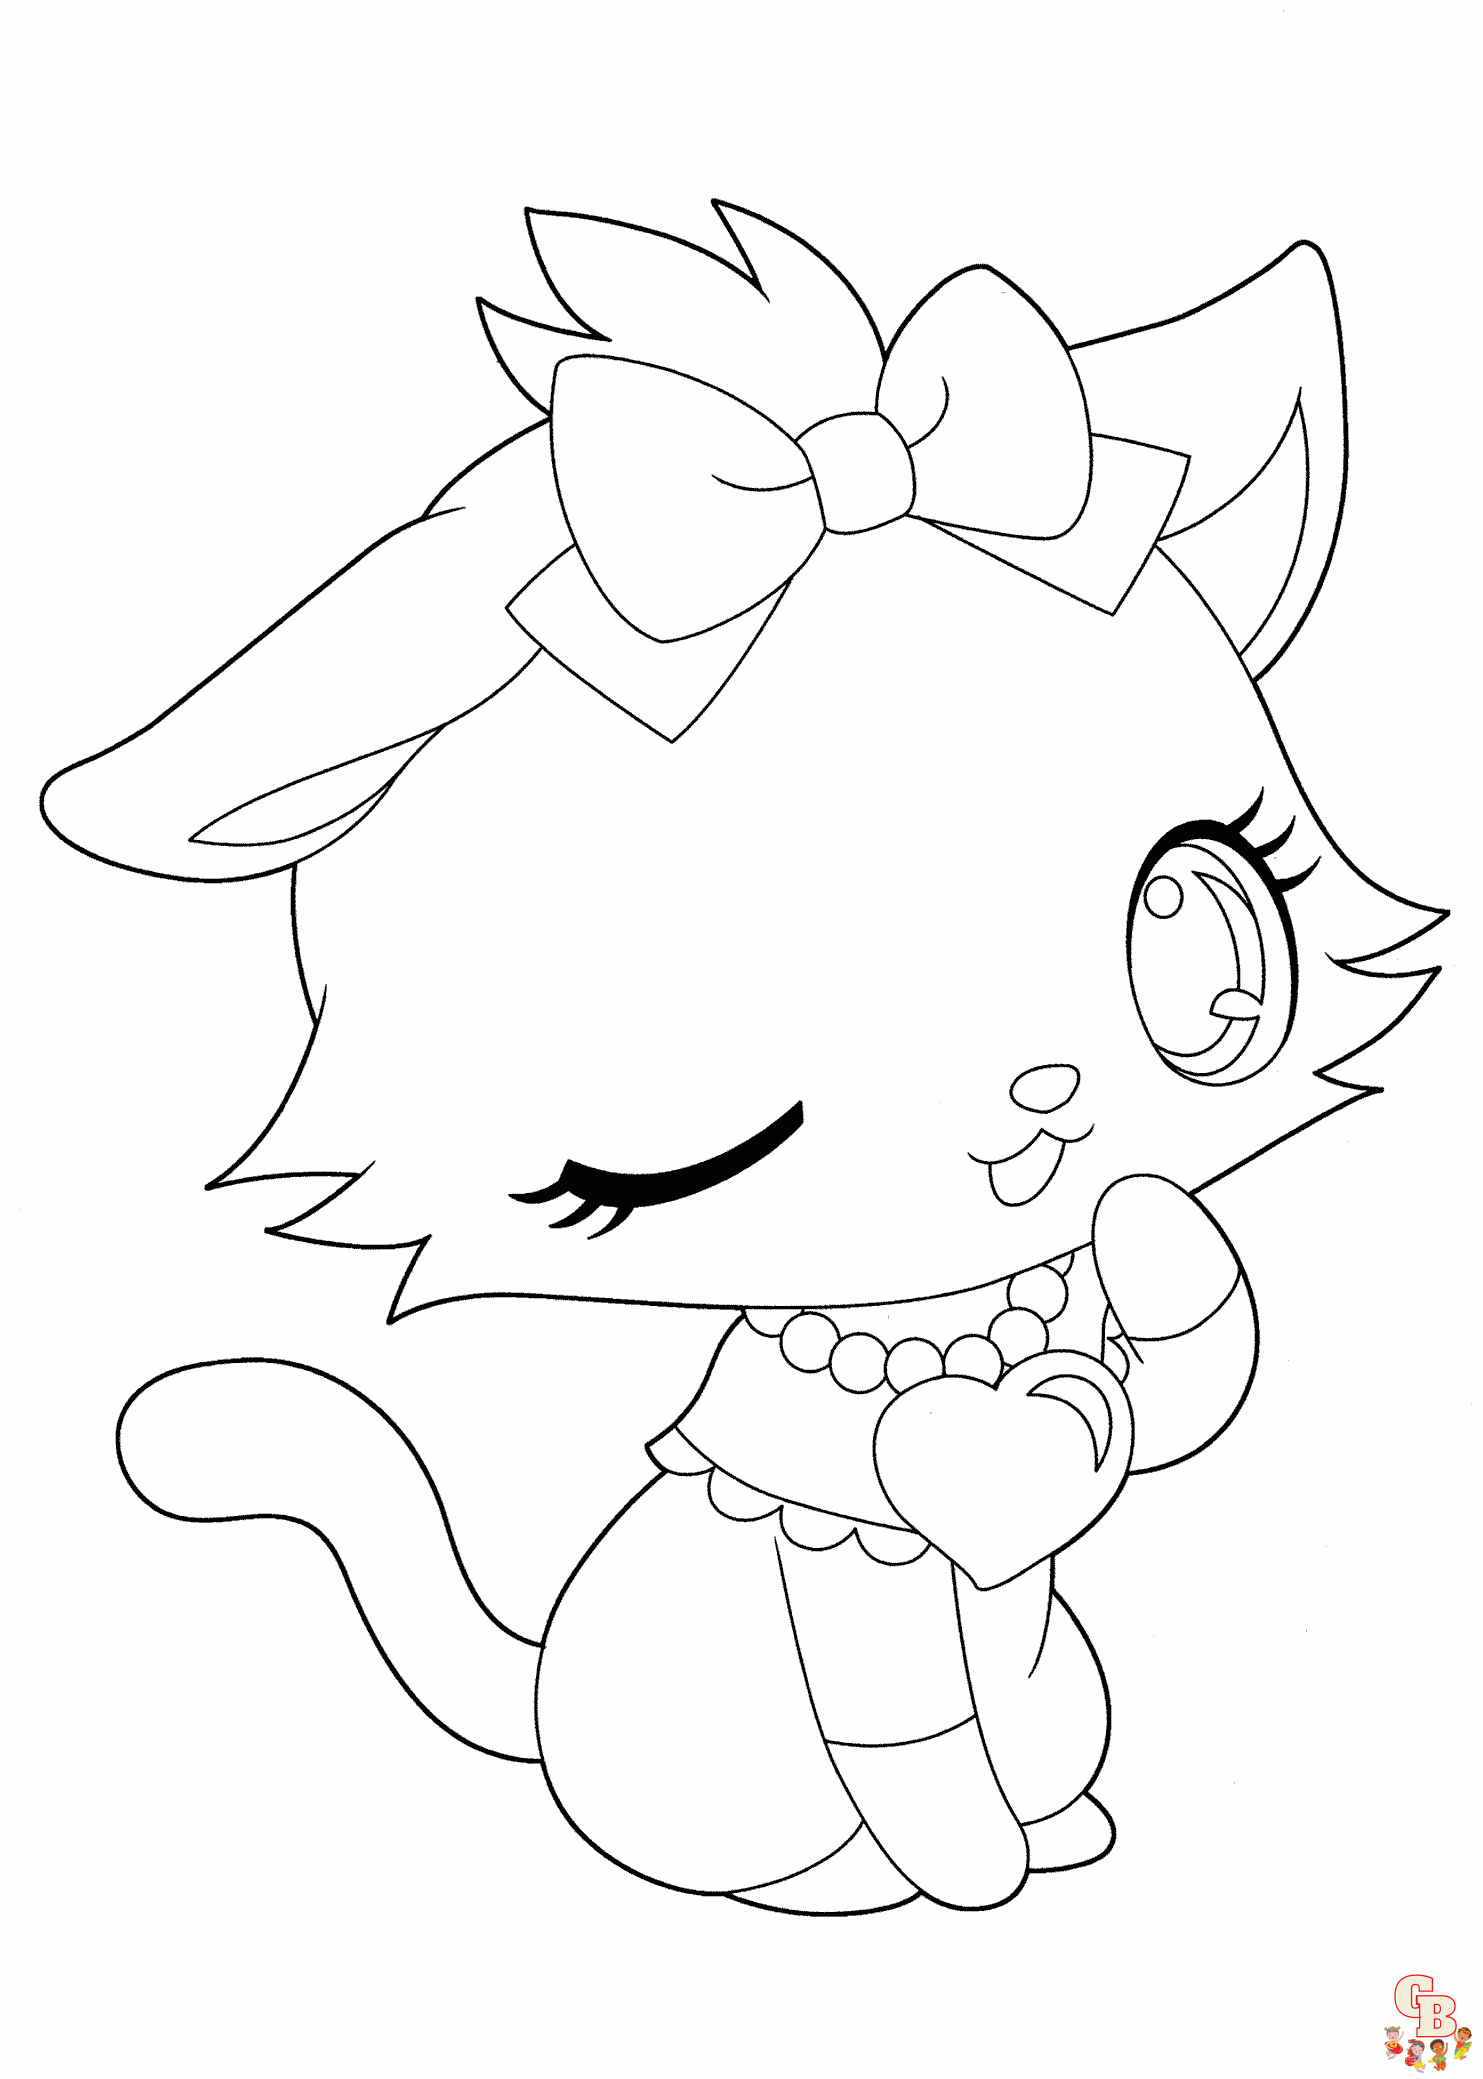 Cute Cartoon Cat Coloring Page | Easy Drawing Guides